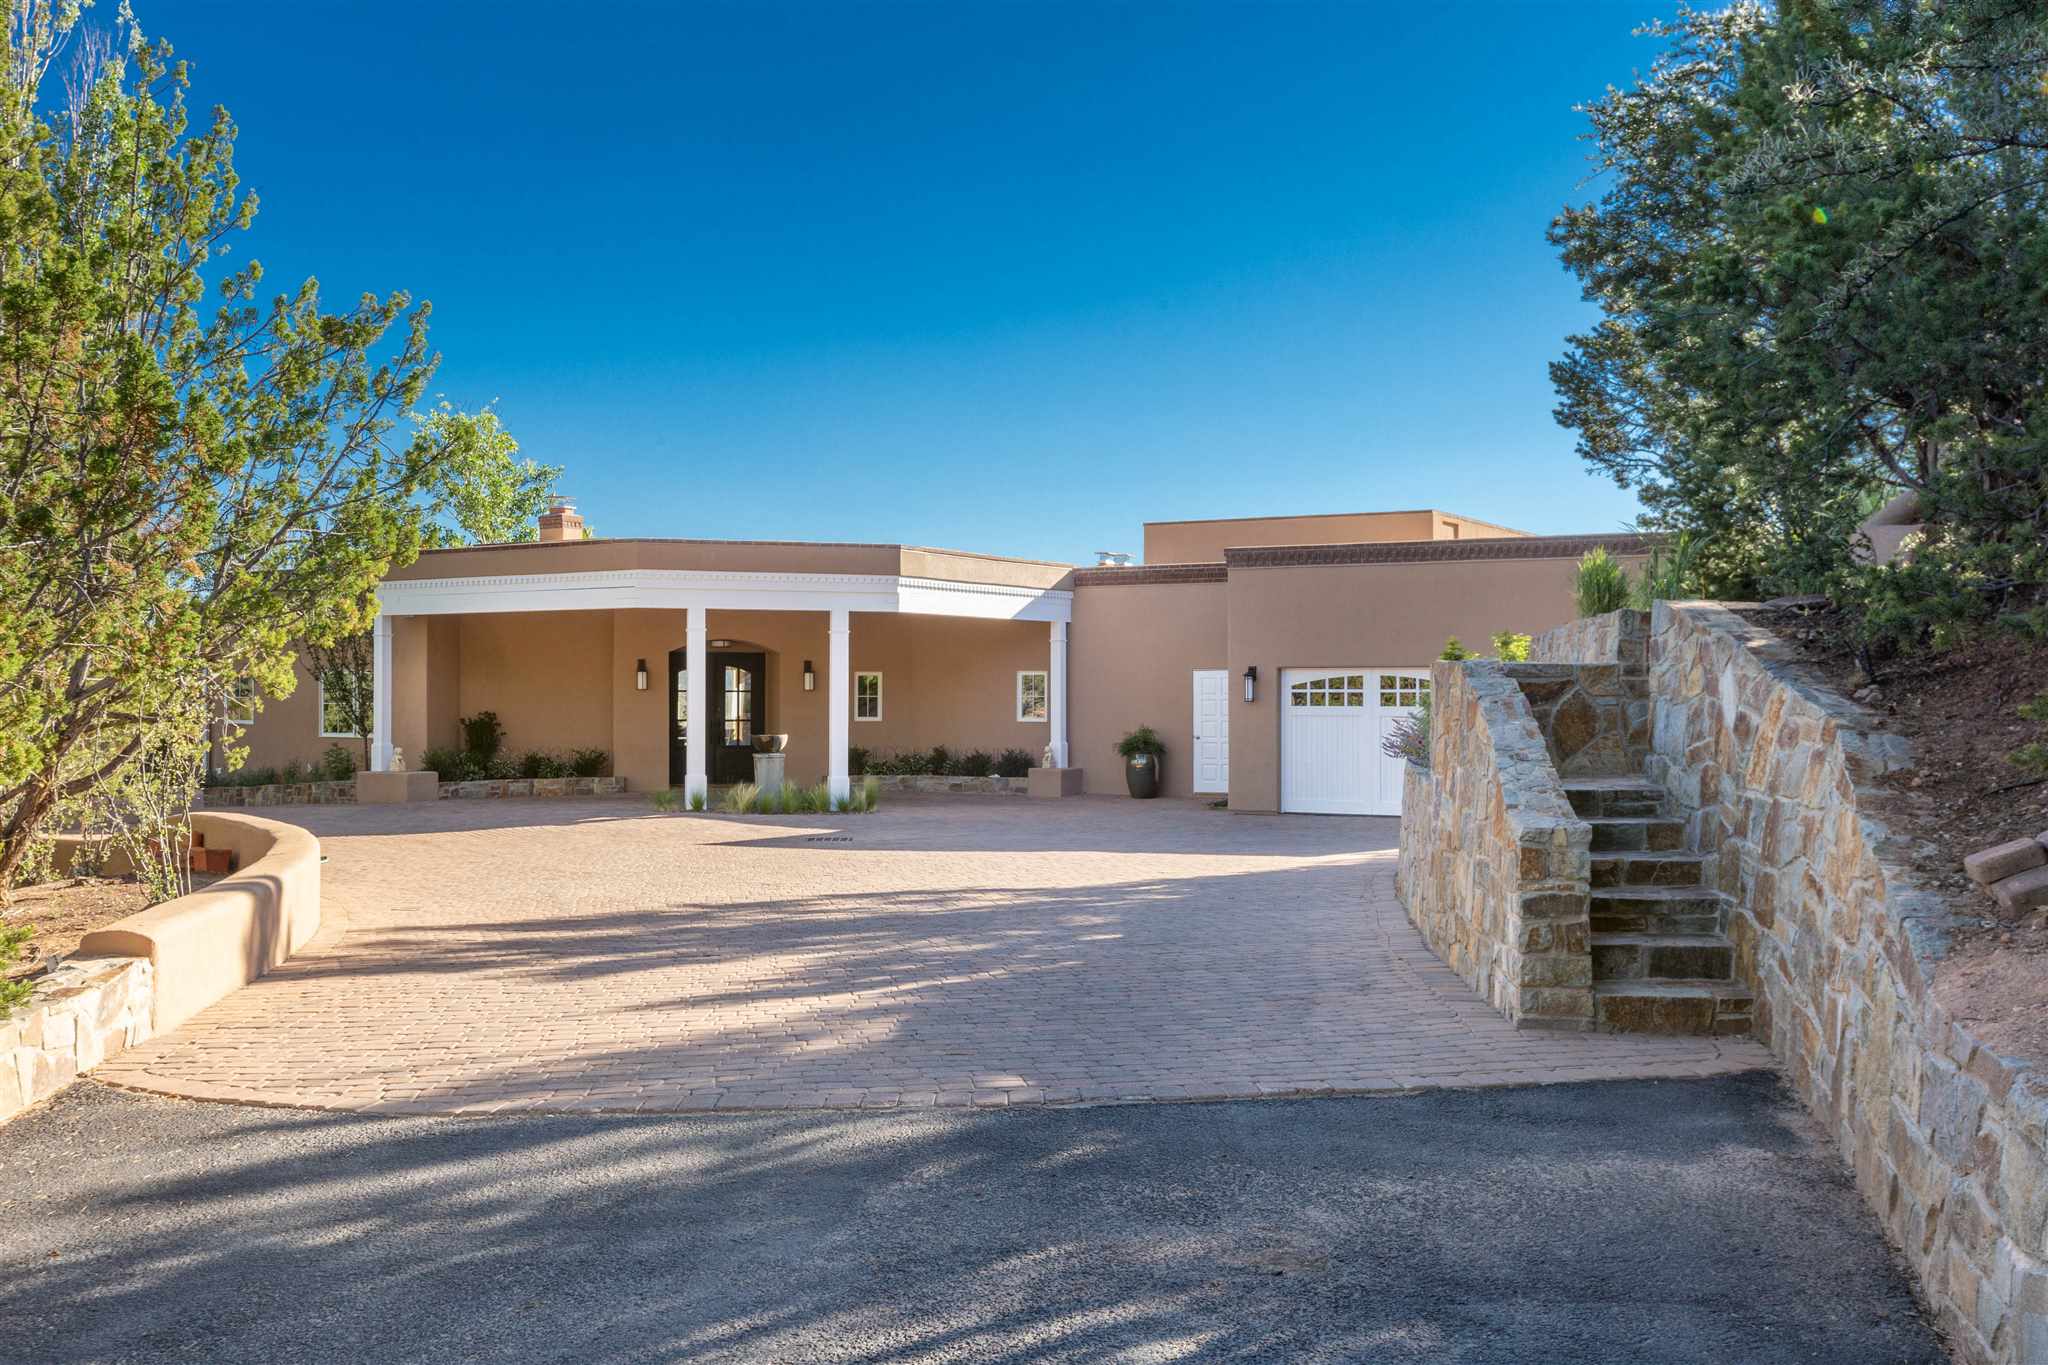 38 Circle Drive Compound, Santa Fe, New Mexico 87501, 4 Bedrooms Bedrooms, ,5 BathroomsBathrooms,Residential,For Sale,38 Circle Drive Compound,202002724